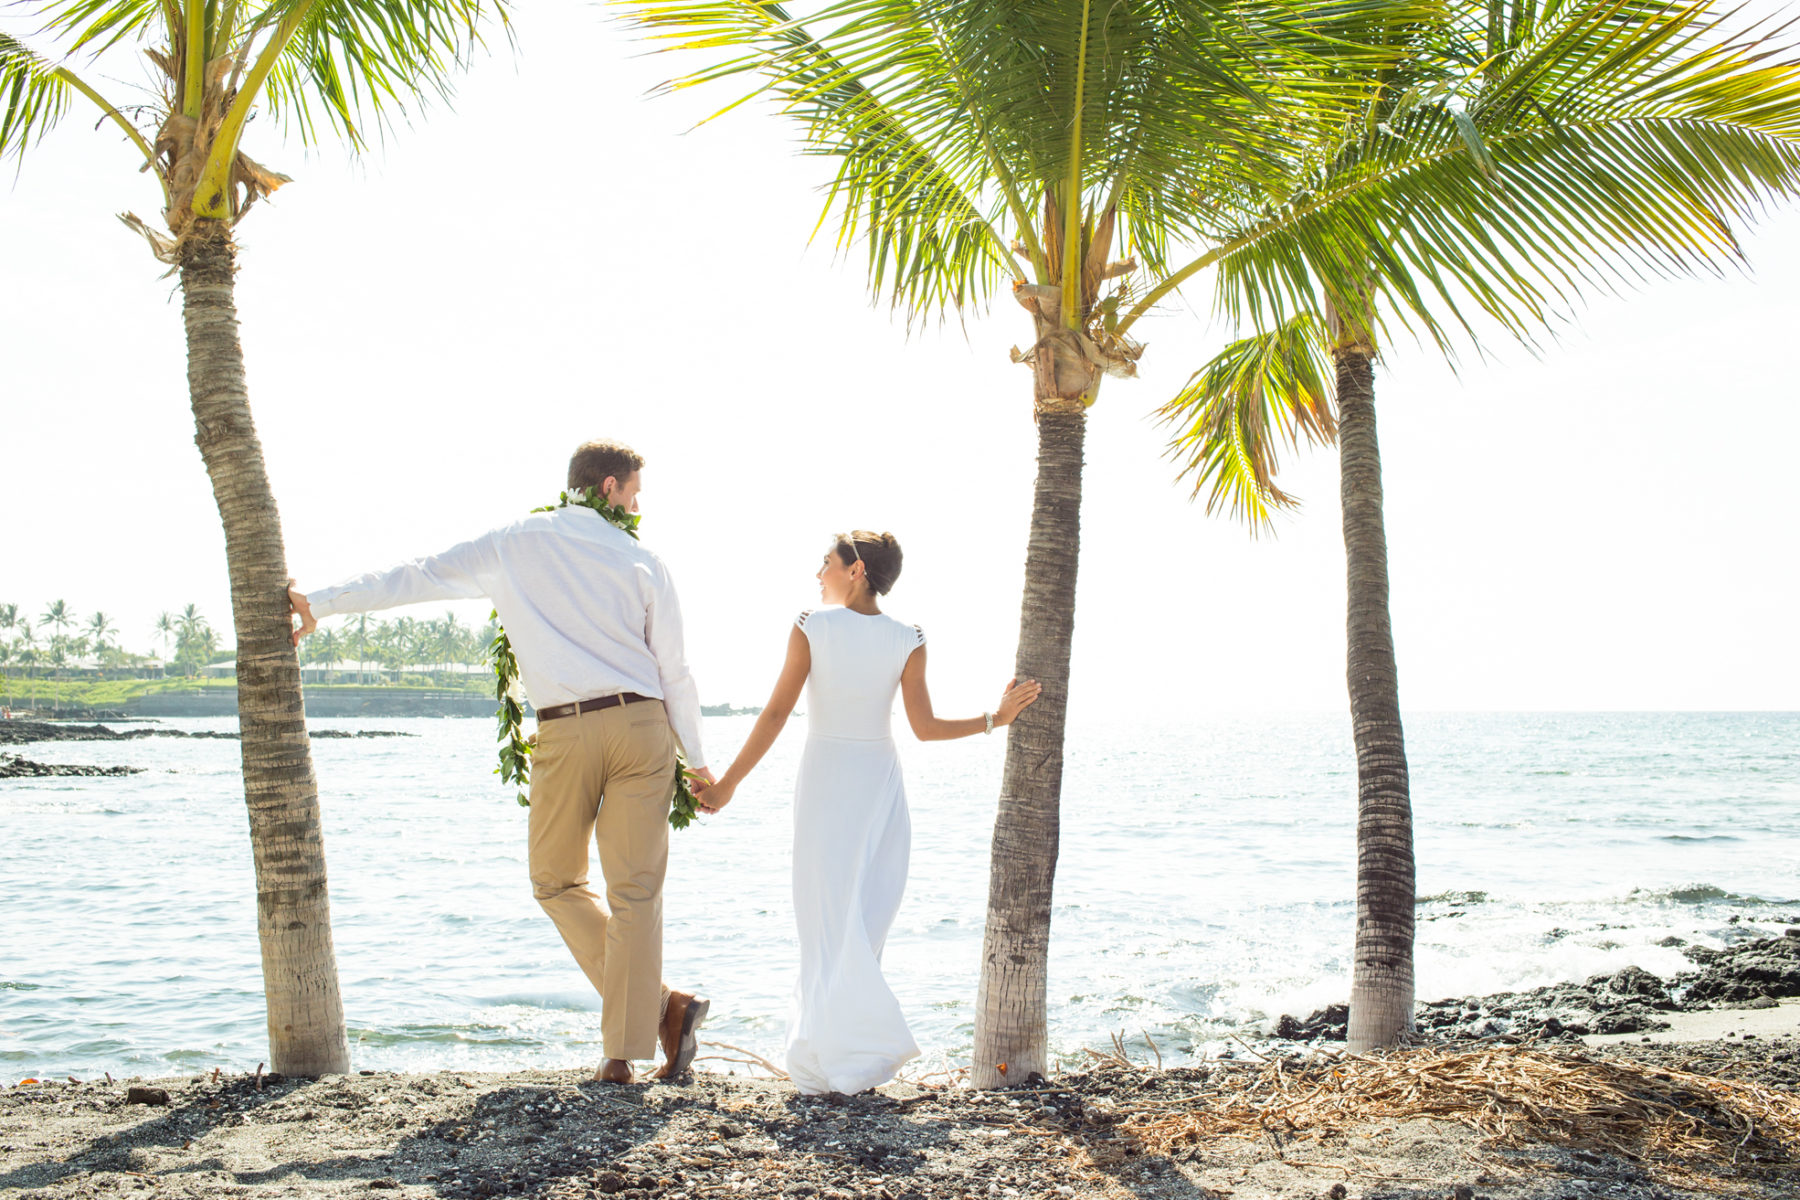 Why You Should Book a Honeymoon in Hawaii from Honeymoons Inc.